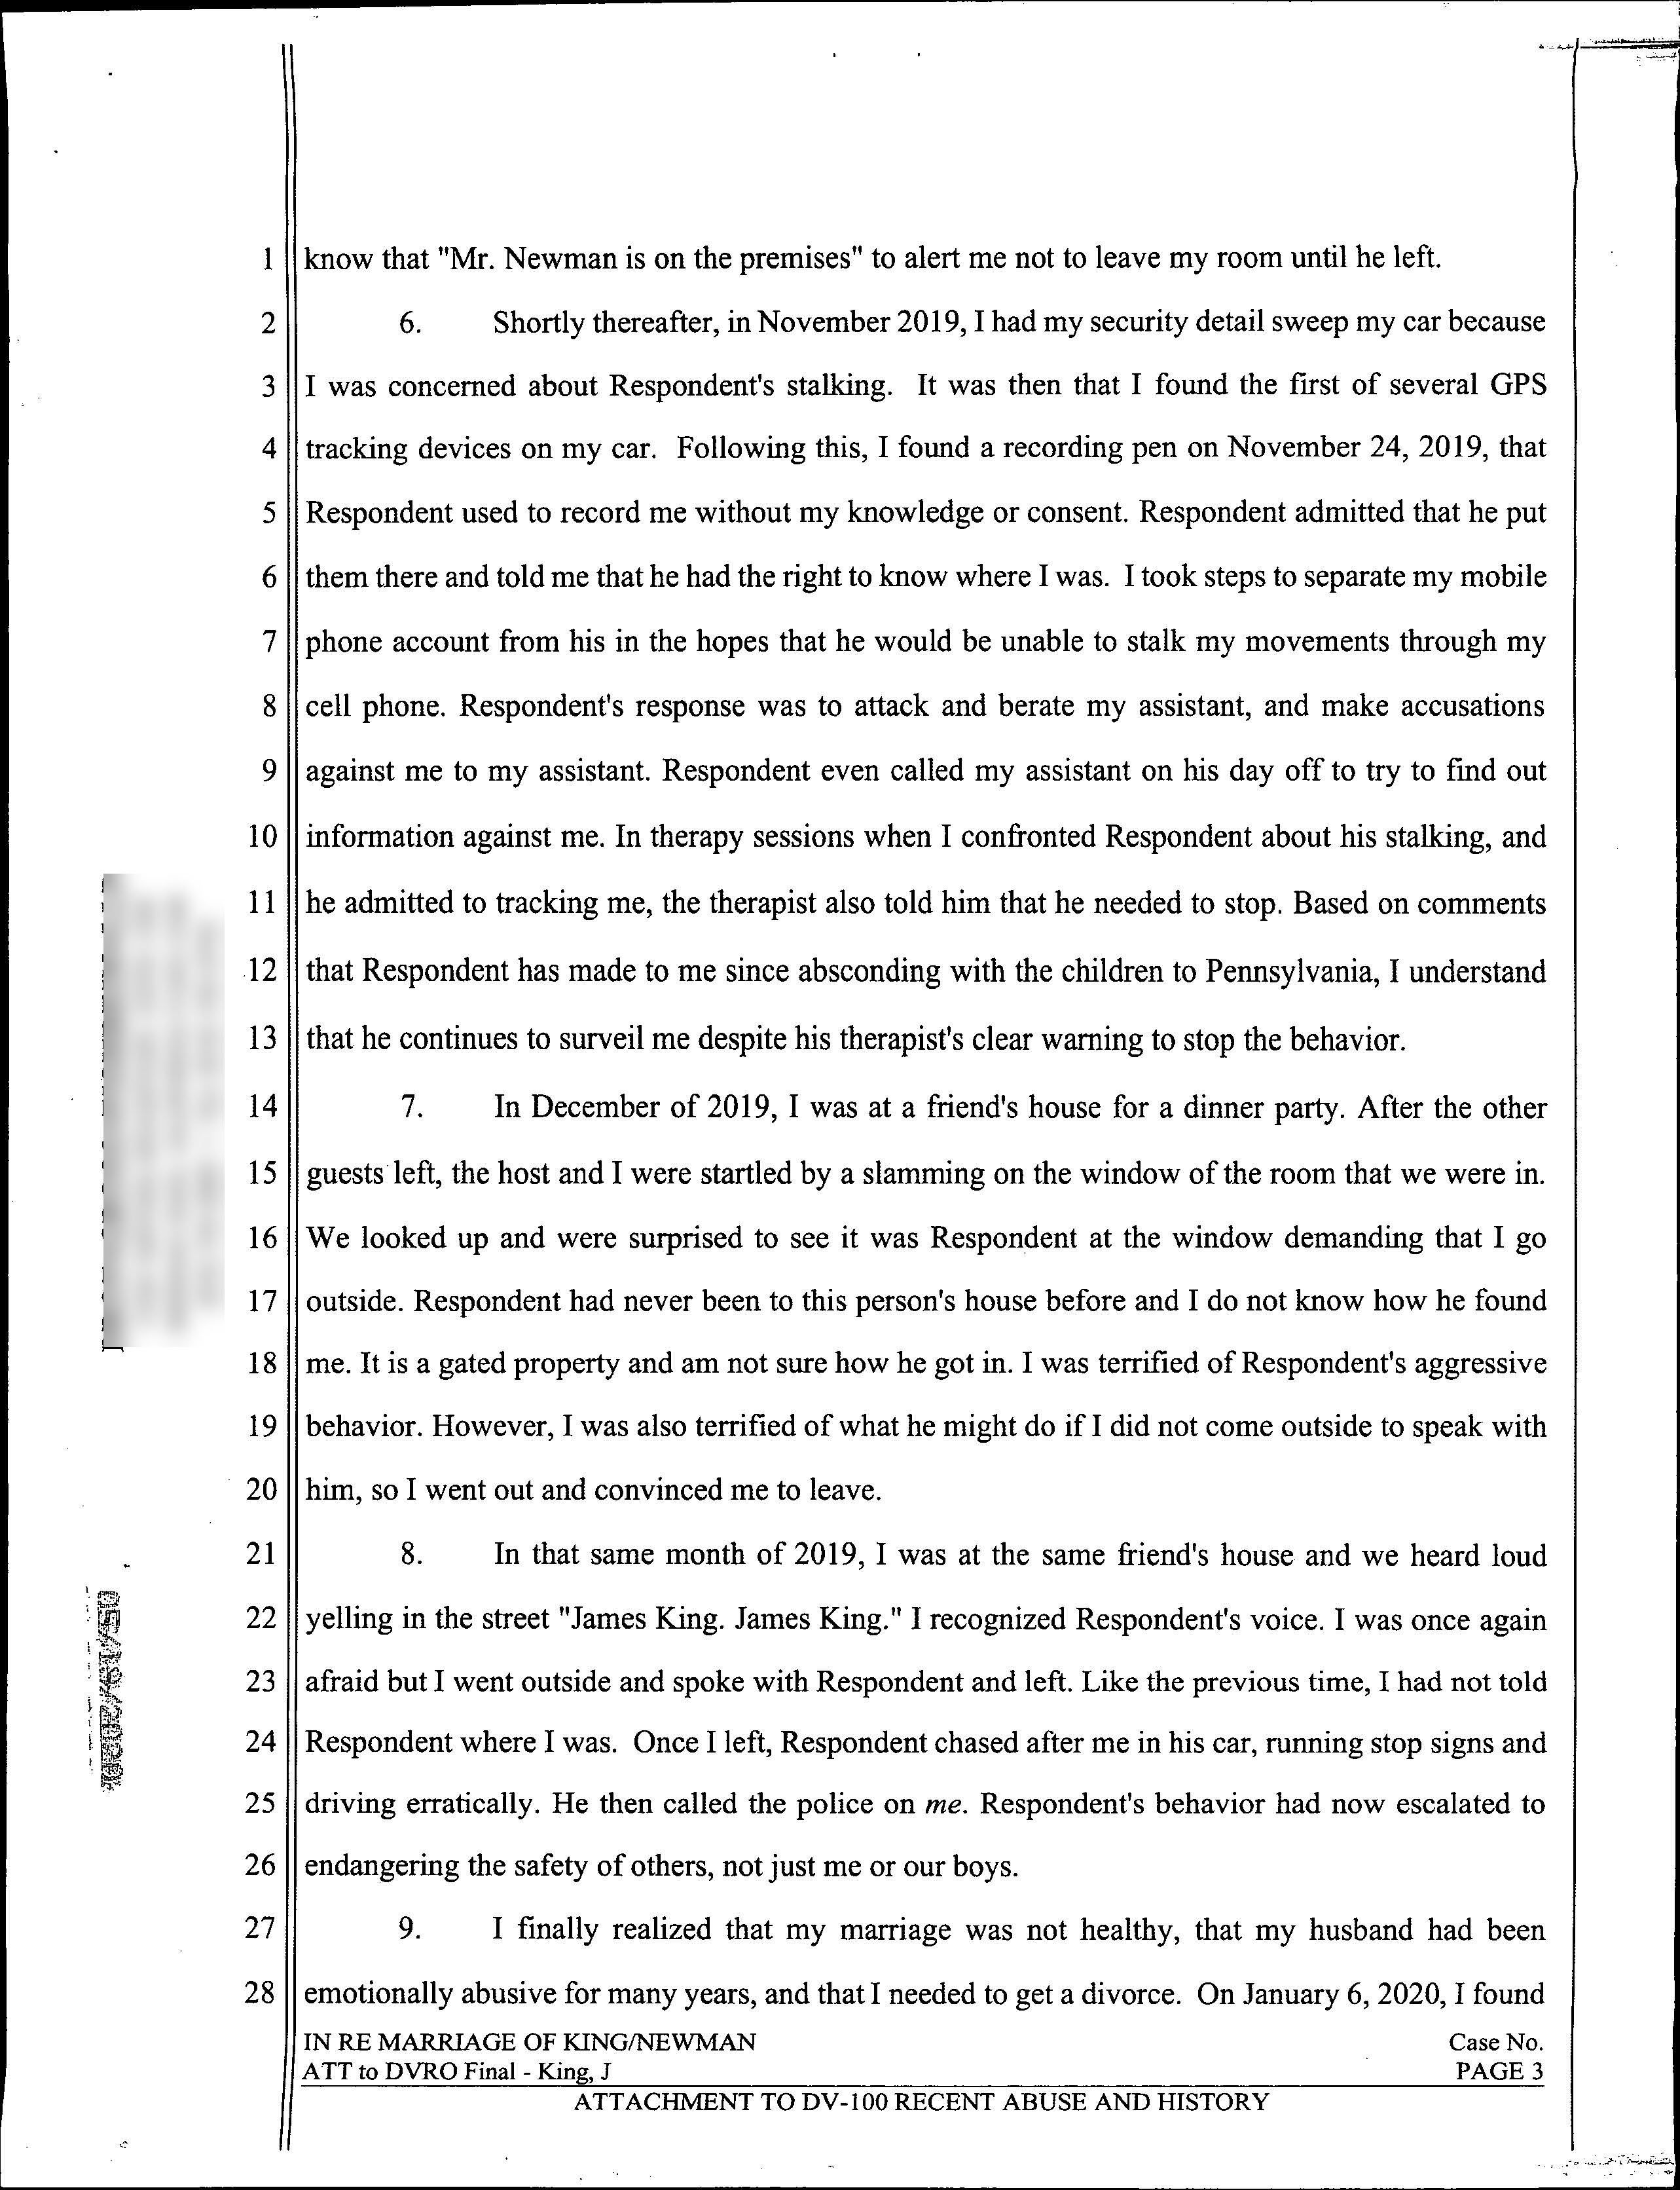 Page three of Jaime King's domestic violence restraining order declaration